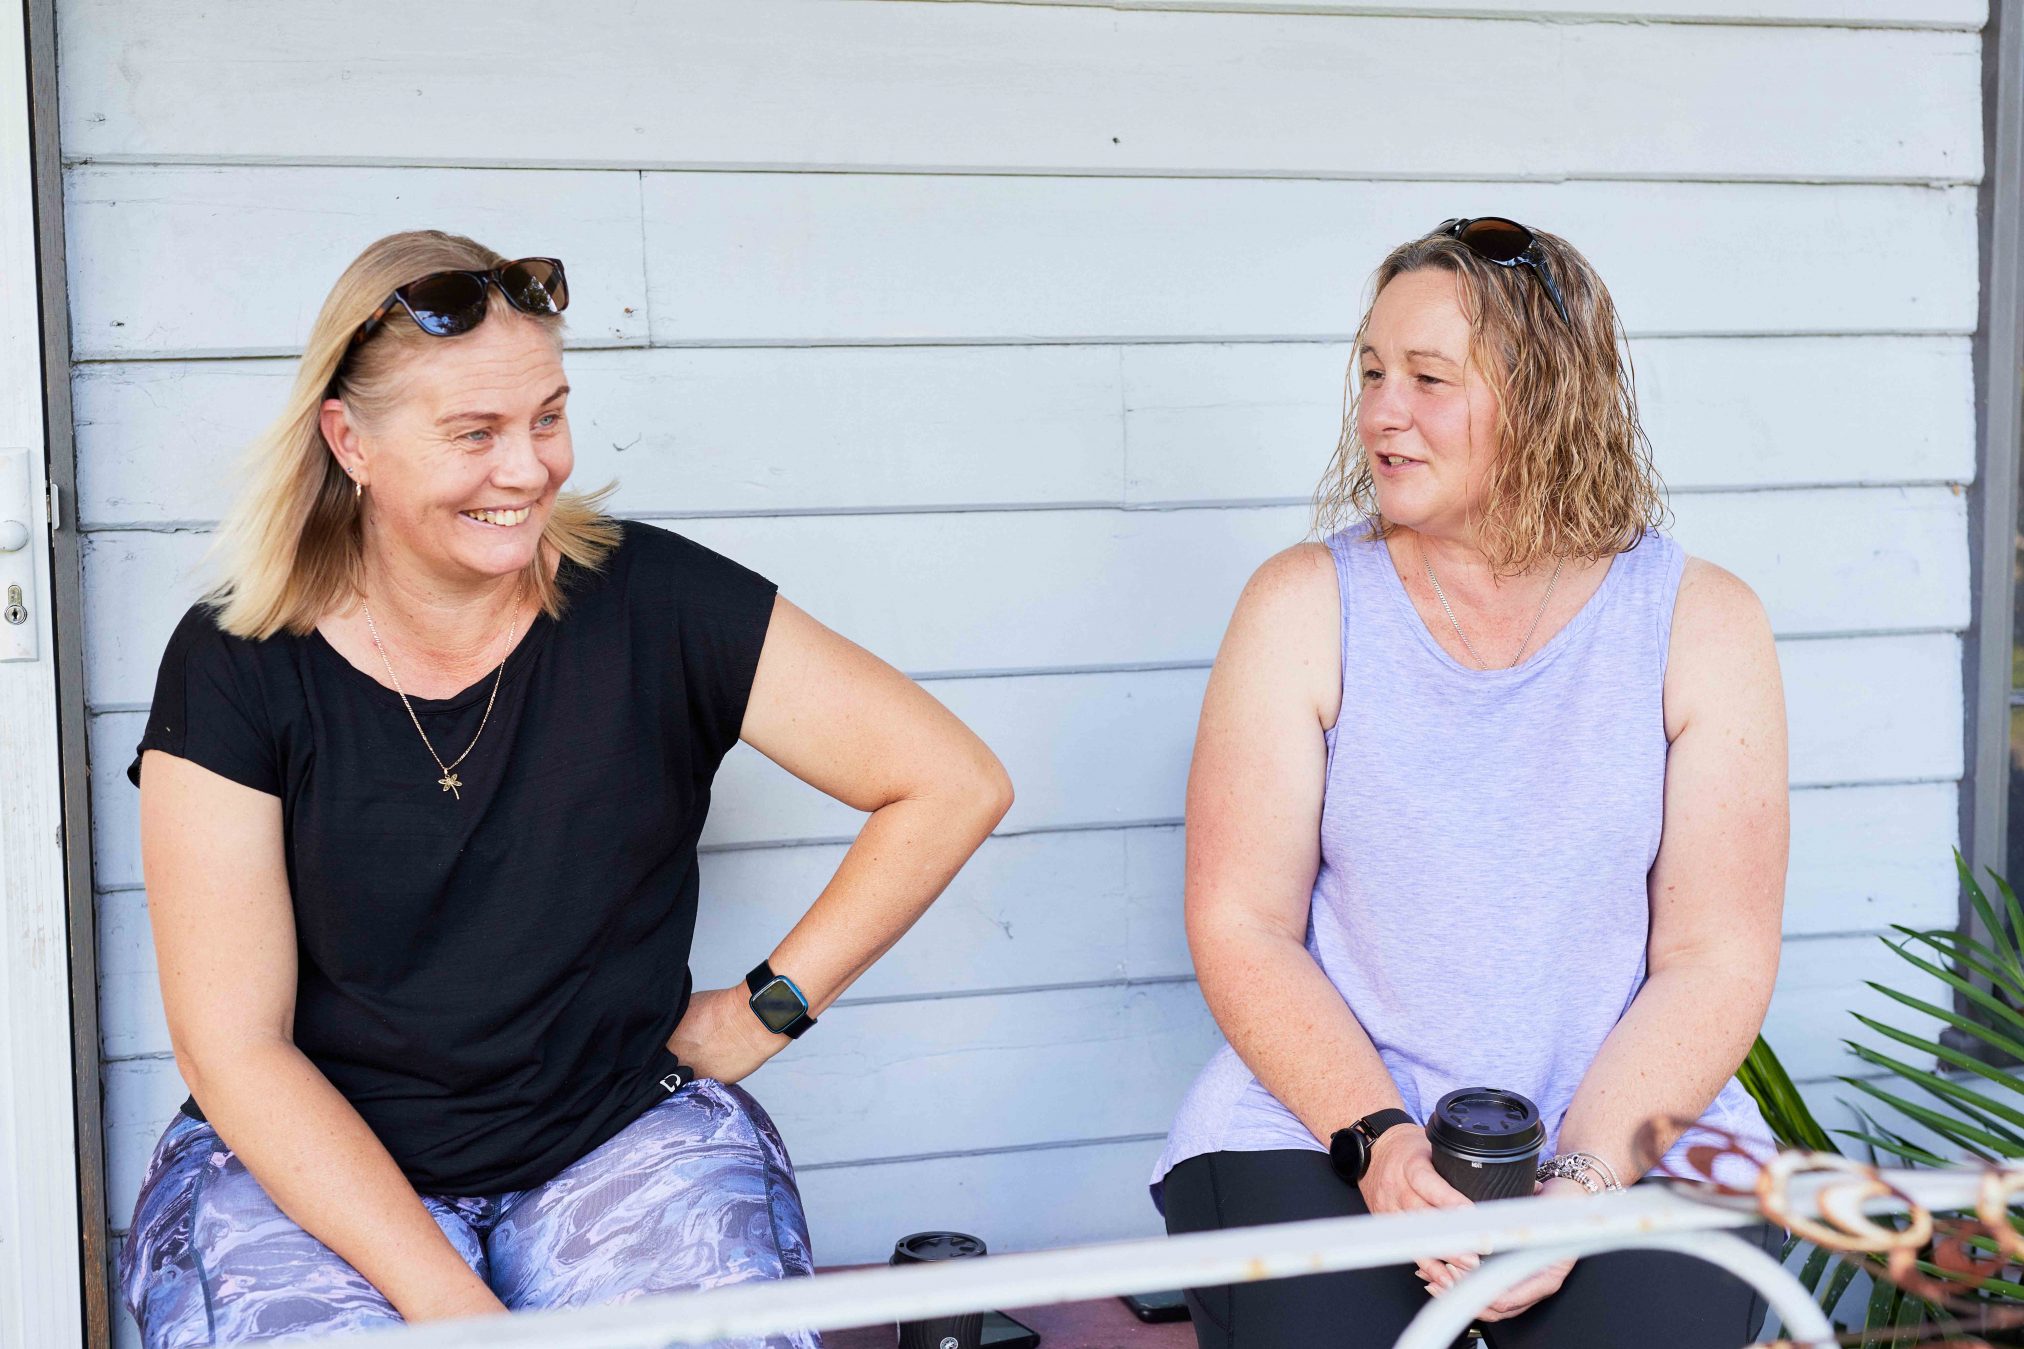 Two women having a conversation. One is laughing and they are sitting on a veranda.